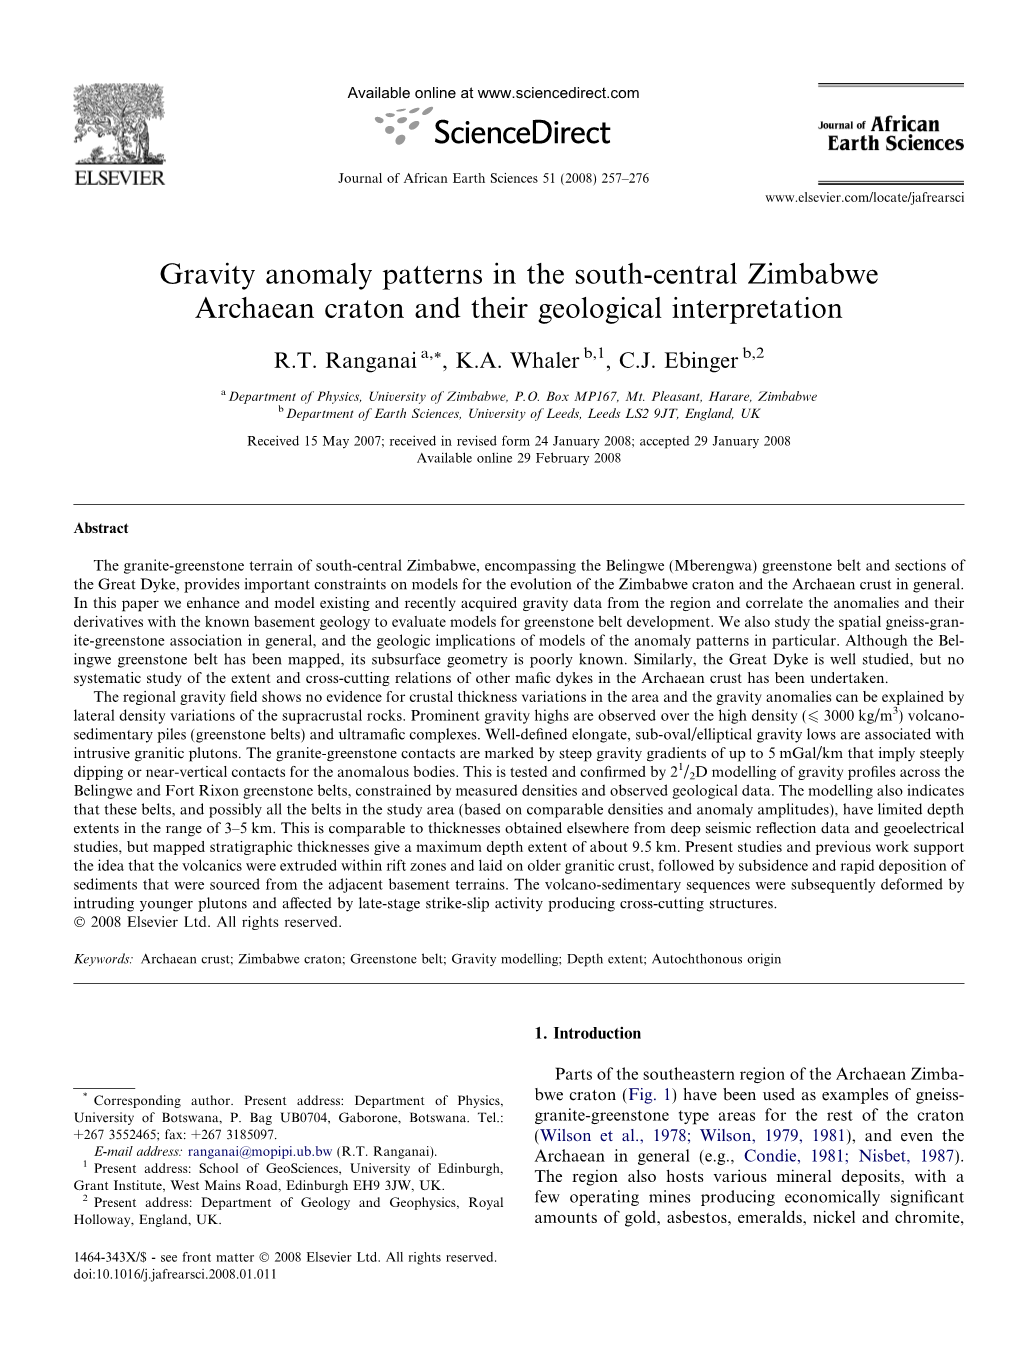 Gravity Anomaly Patterns in the South-Central Zimbabwe Archaean Craton and Their Geological Interpretation